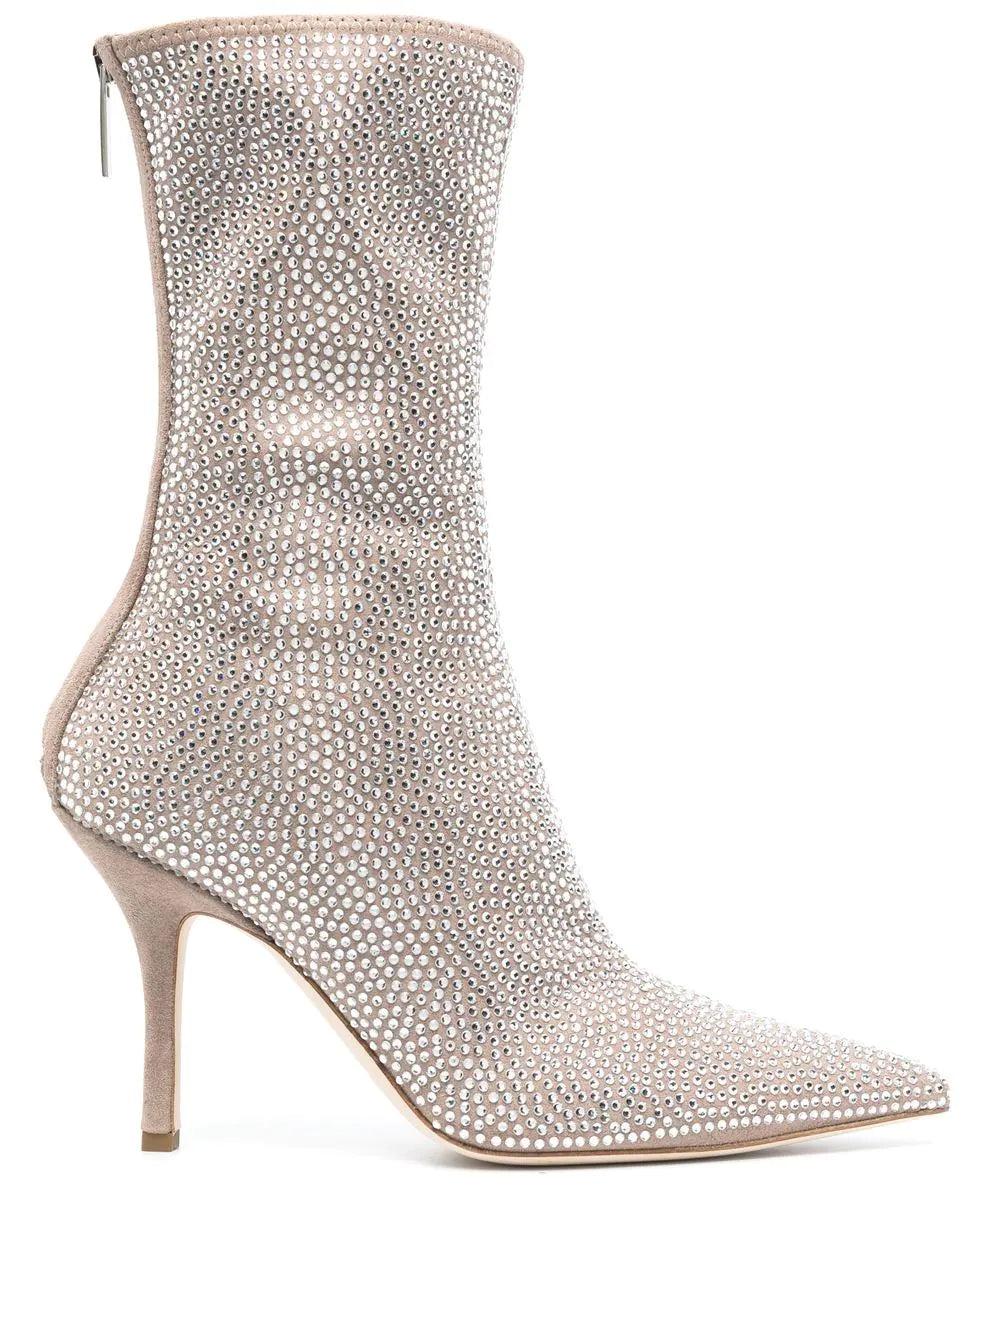 Paris Texas Crystal-embellished 105mm Pointed Boots in White | Lyst